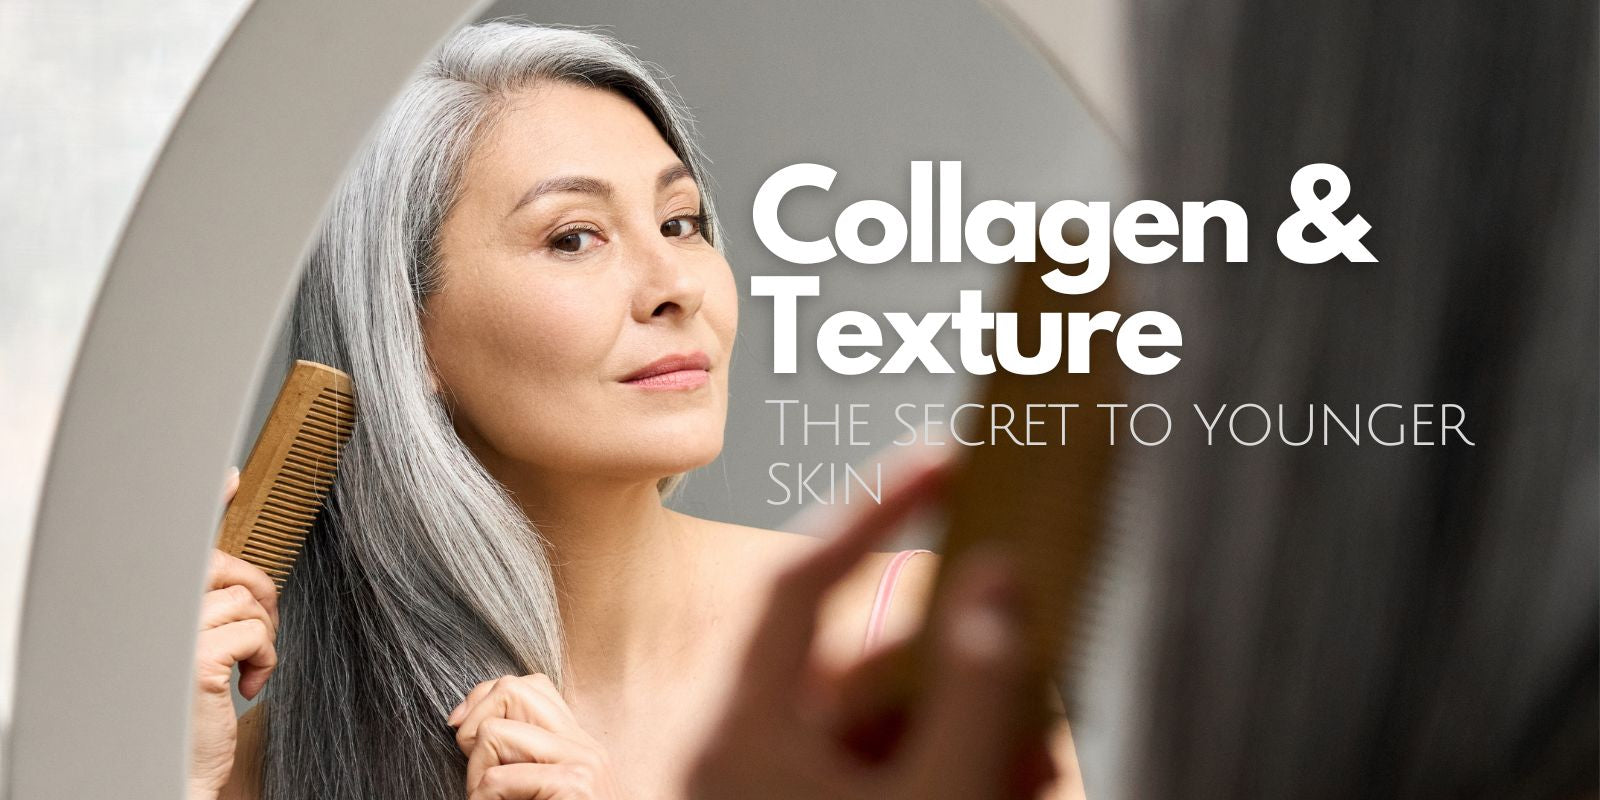 collagen and smooth skin texture. The secret to younger skin.